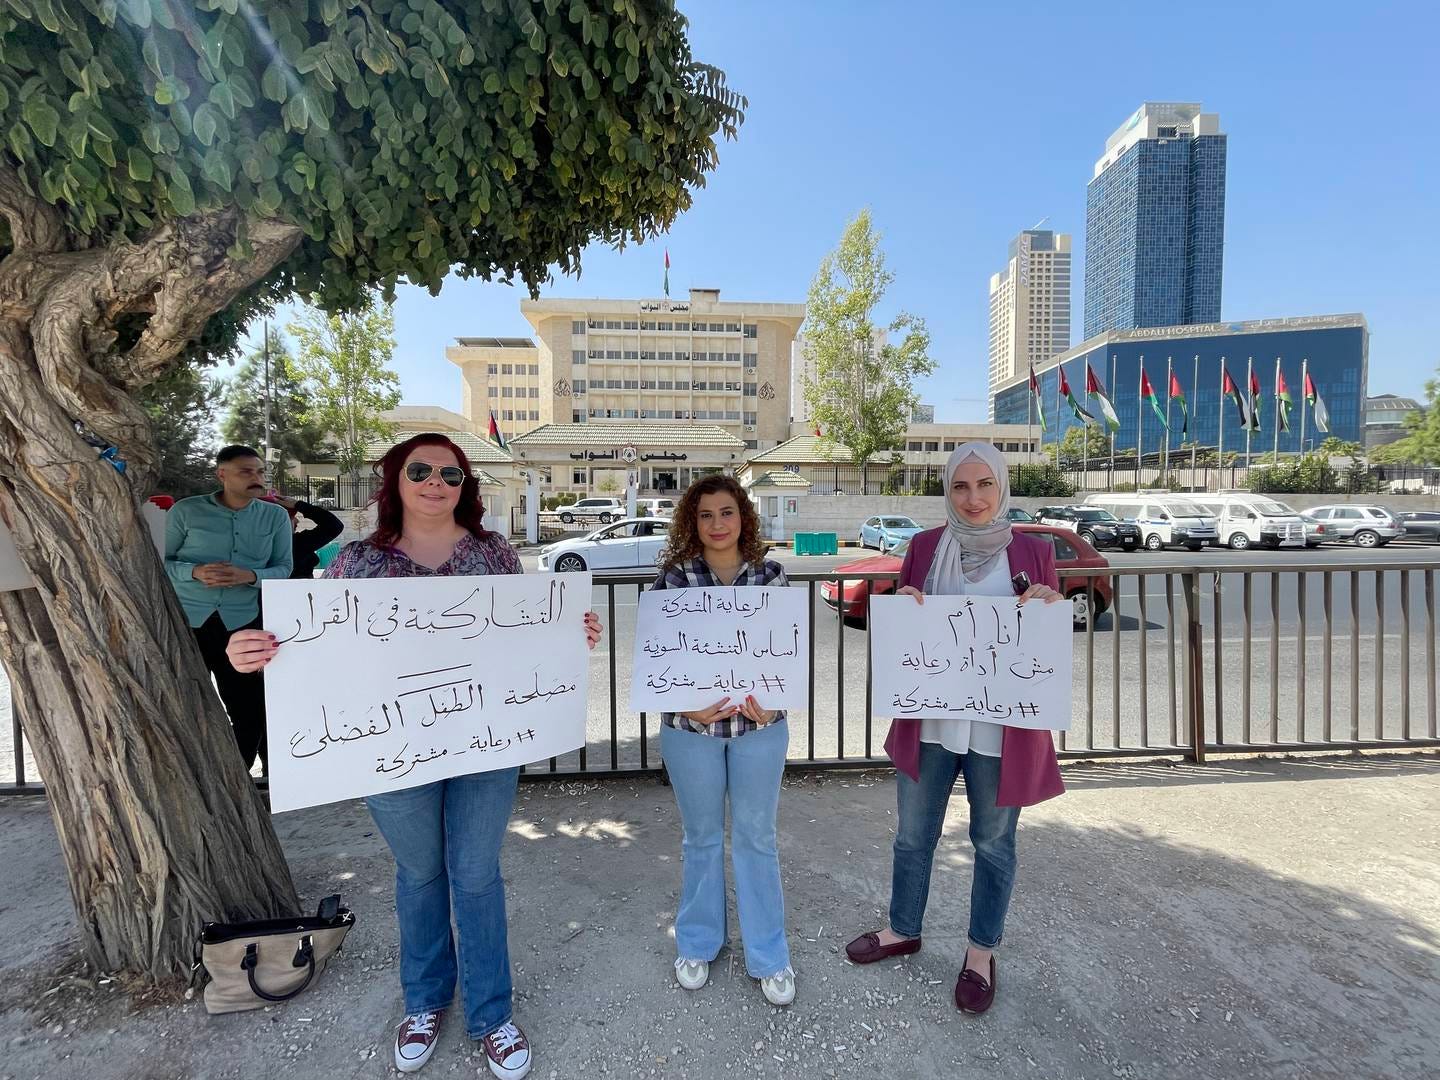 Three women protested on Sunday in front of Jordan’s parliament against a new law granting only the father a say in a child’s education, in low turnout reflecting little public outcry in the kingdom regarding curbs on women’s rights.